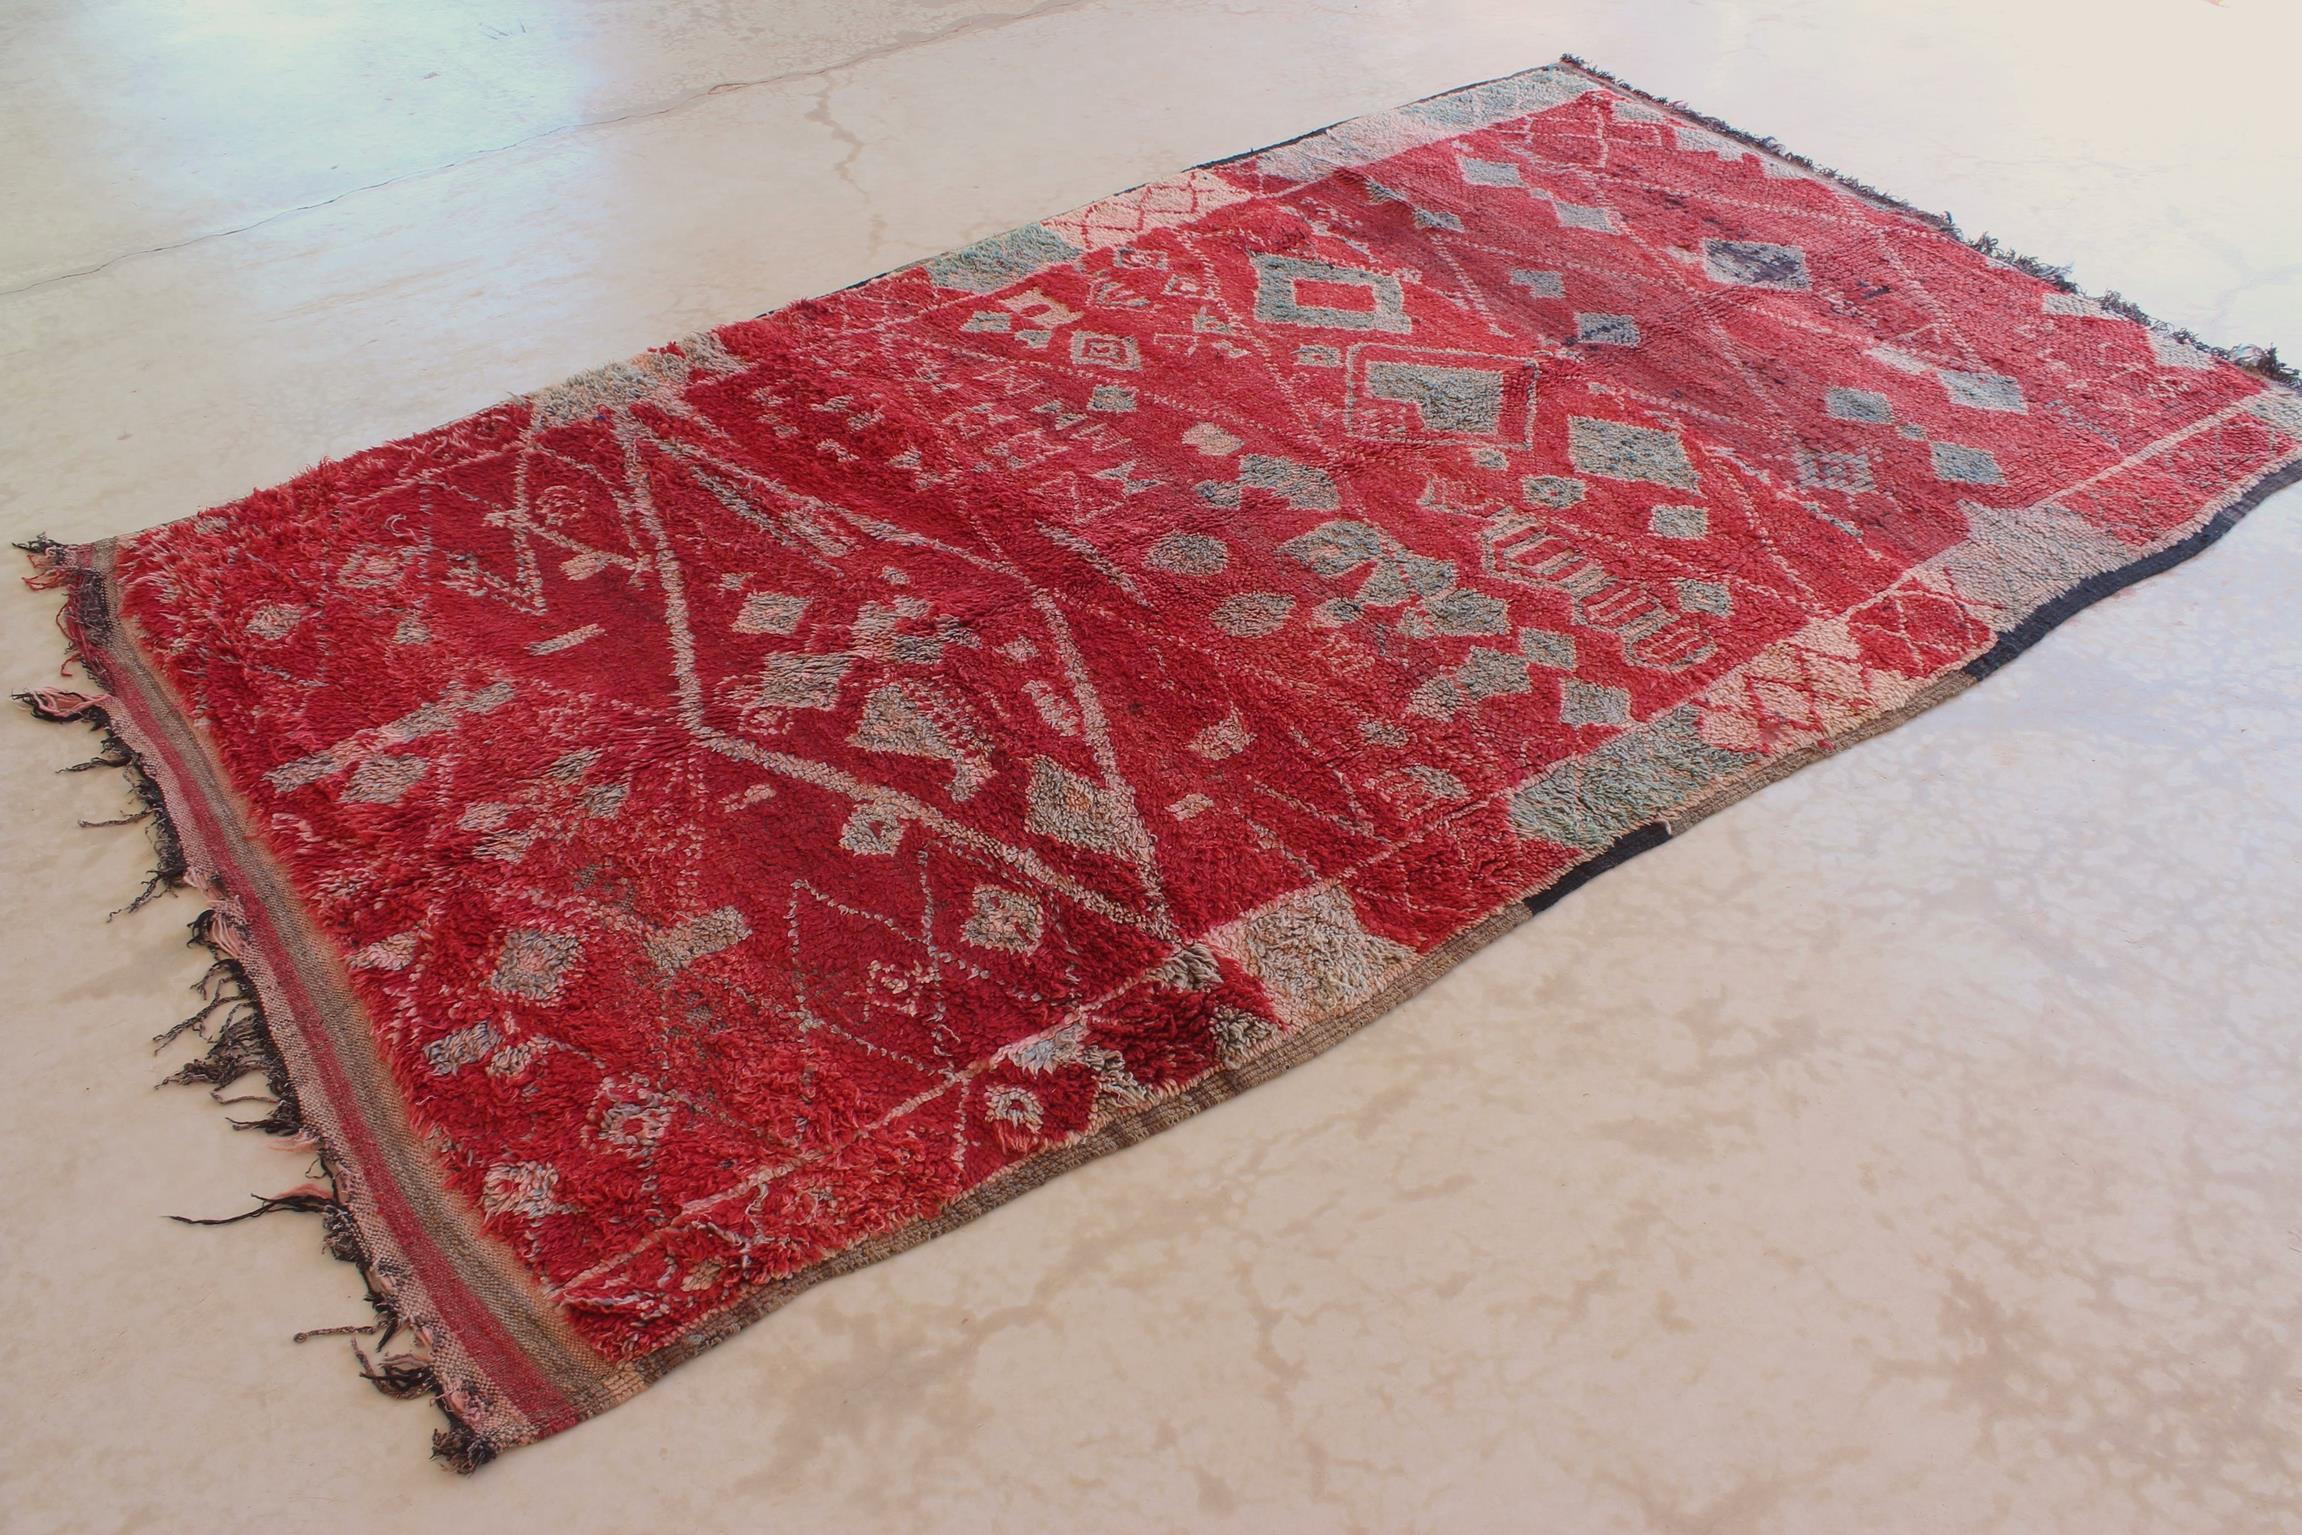 Hand-Knotted Vintage Moroccan Zayane rug - Red/green - 7x12feet / 213x365cm For Sale